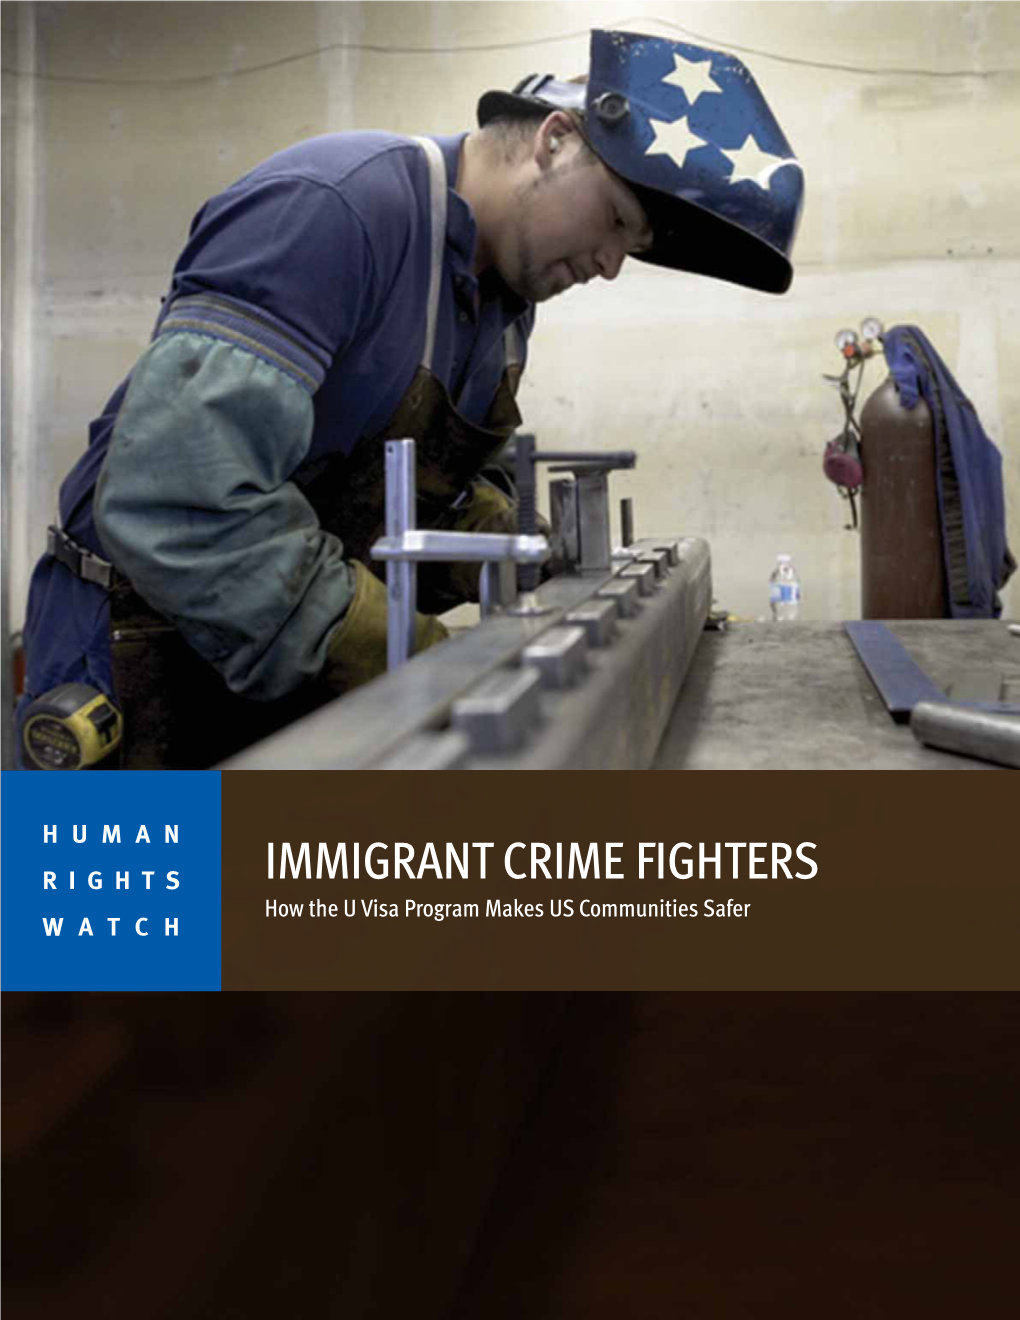 IMMIGRANT CRIME FIGHTERS How the U Visa Program Makes US Communities Safer WATCH